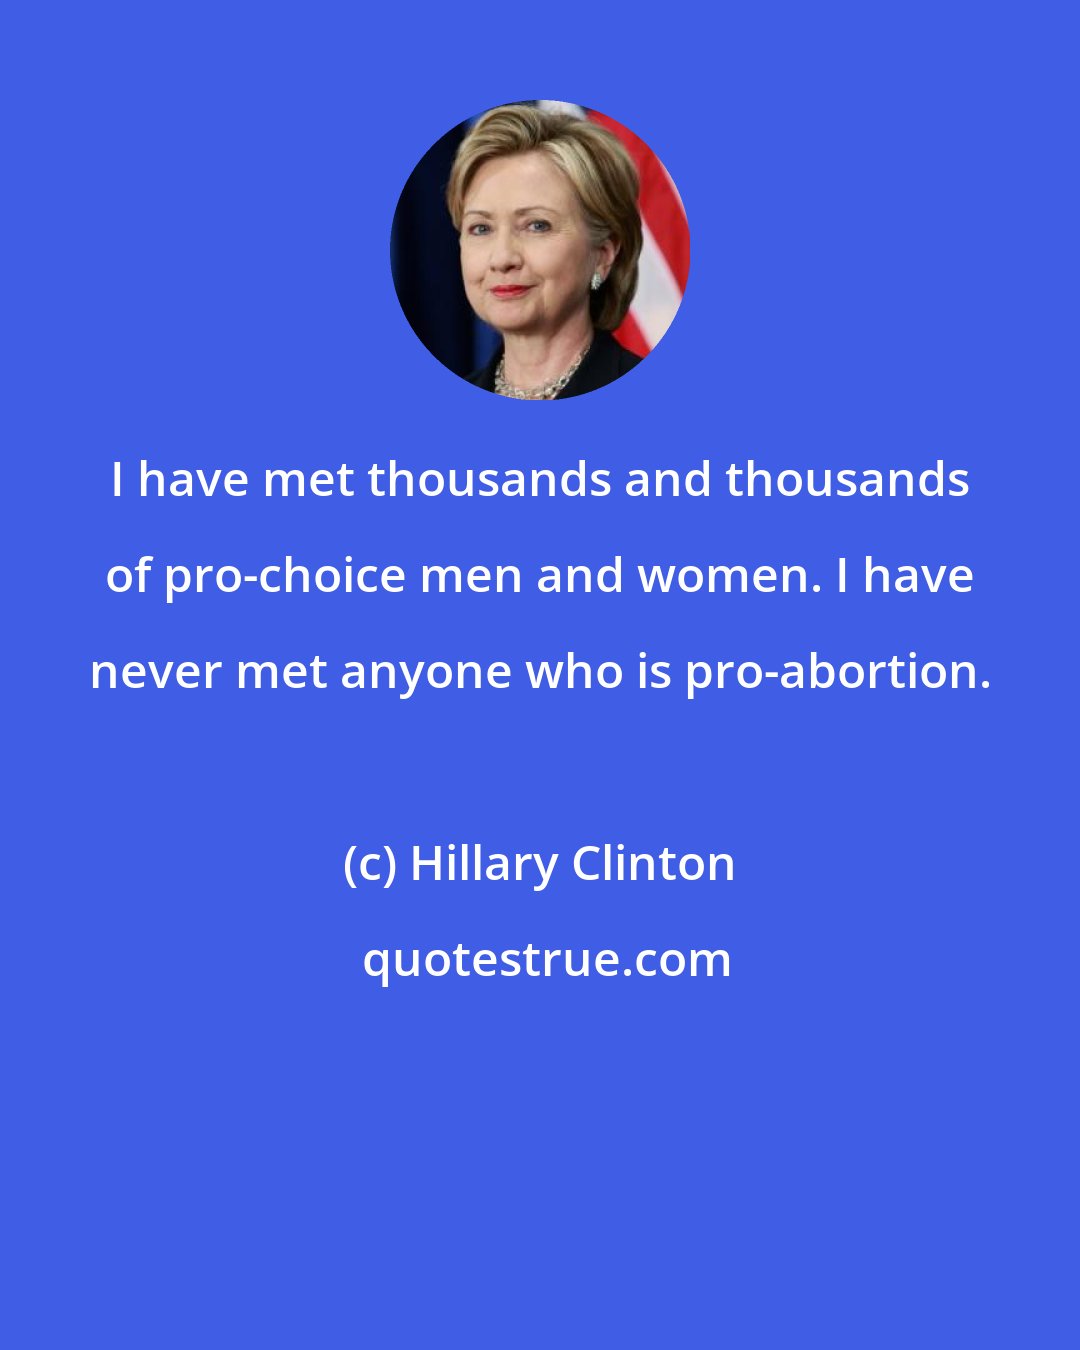 Hillary Clinton: I have met thousands and thousands of pro-choice men and women. I have never met anyone who is pro-abortion.